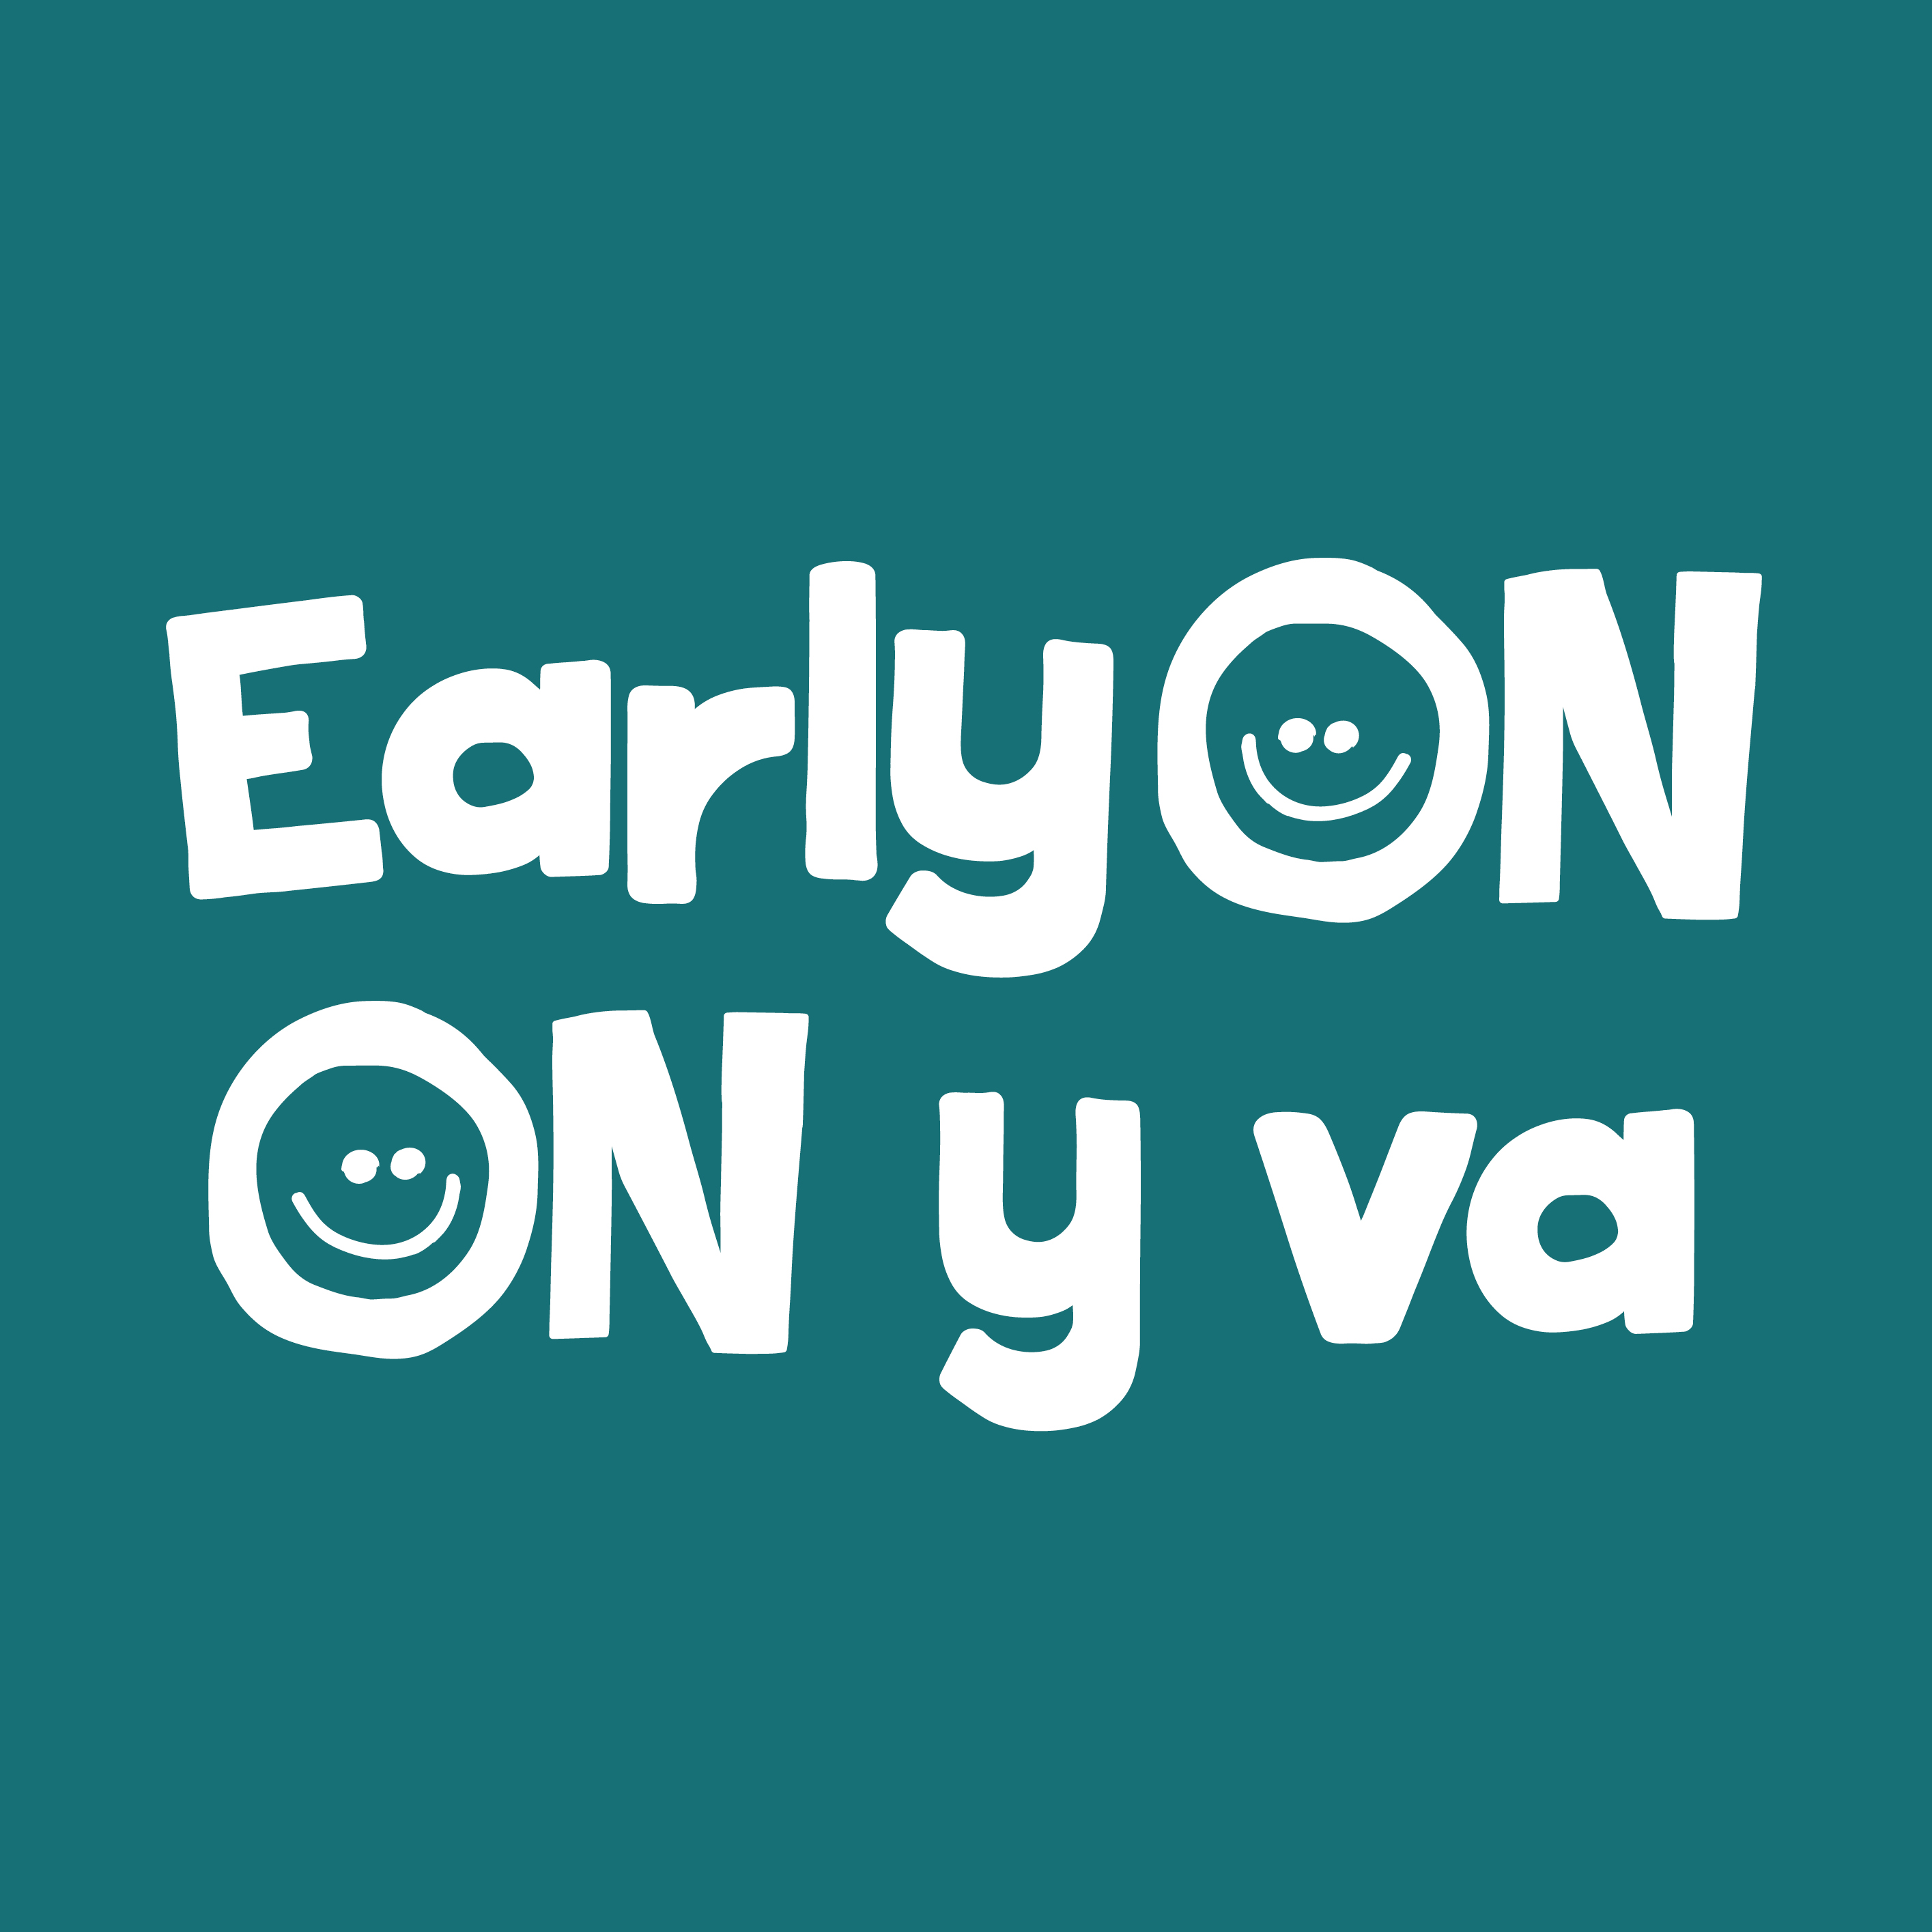 Image of the EarlyON logo in English and French